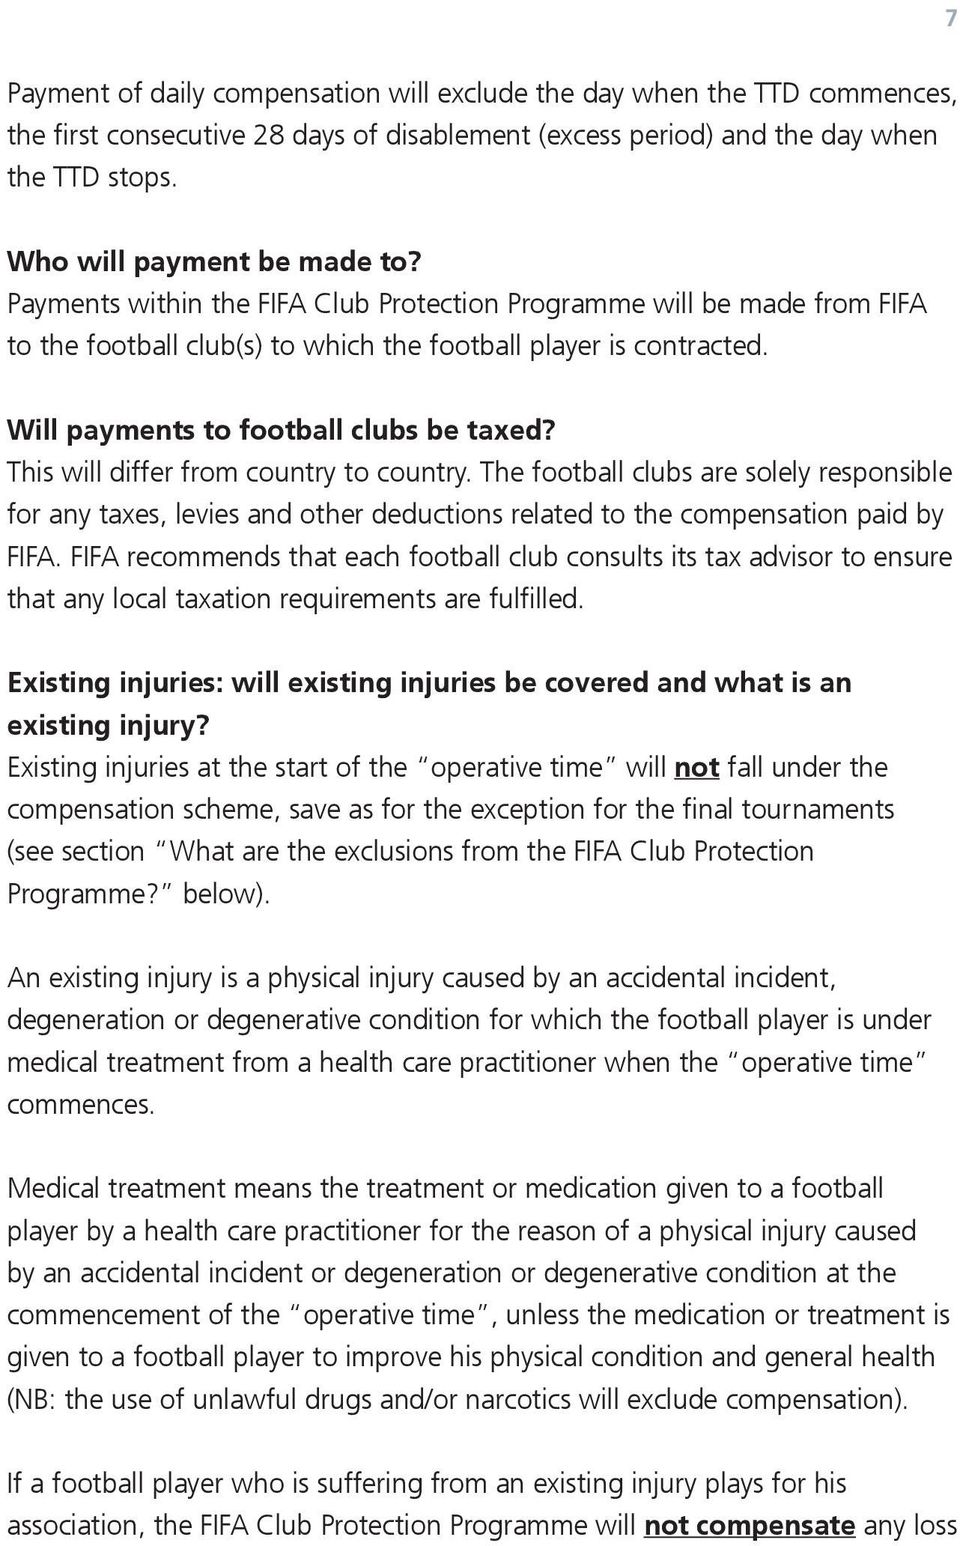 This will differ from country to country. The football clubs are solely responsible for any taxes, levies or deductions related to compensation paid by FIFA.